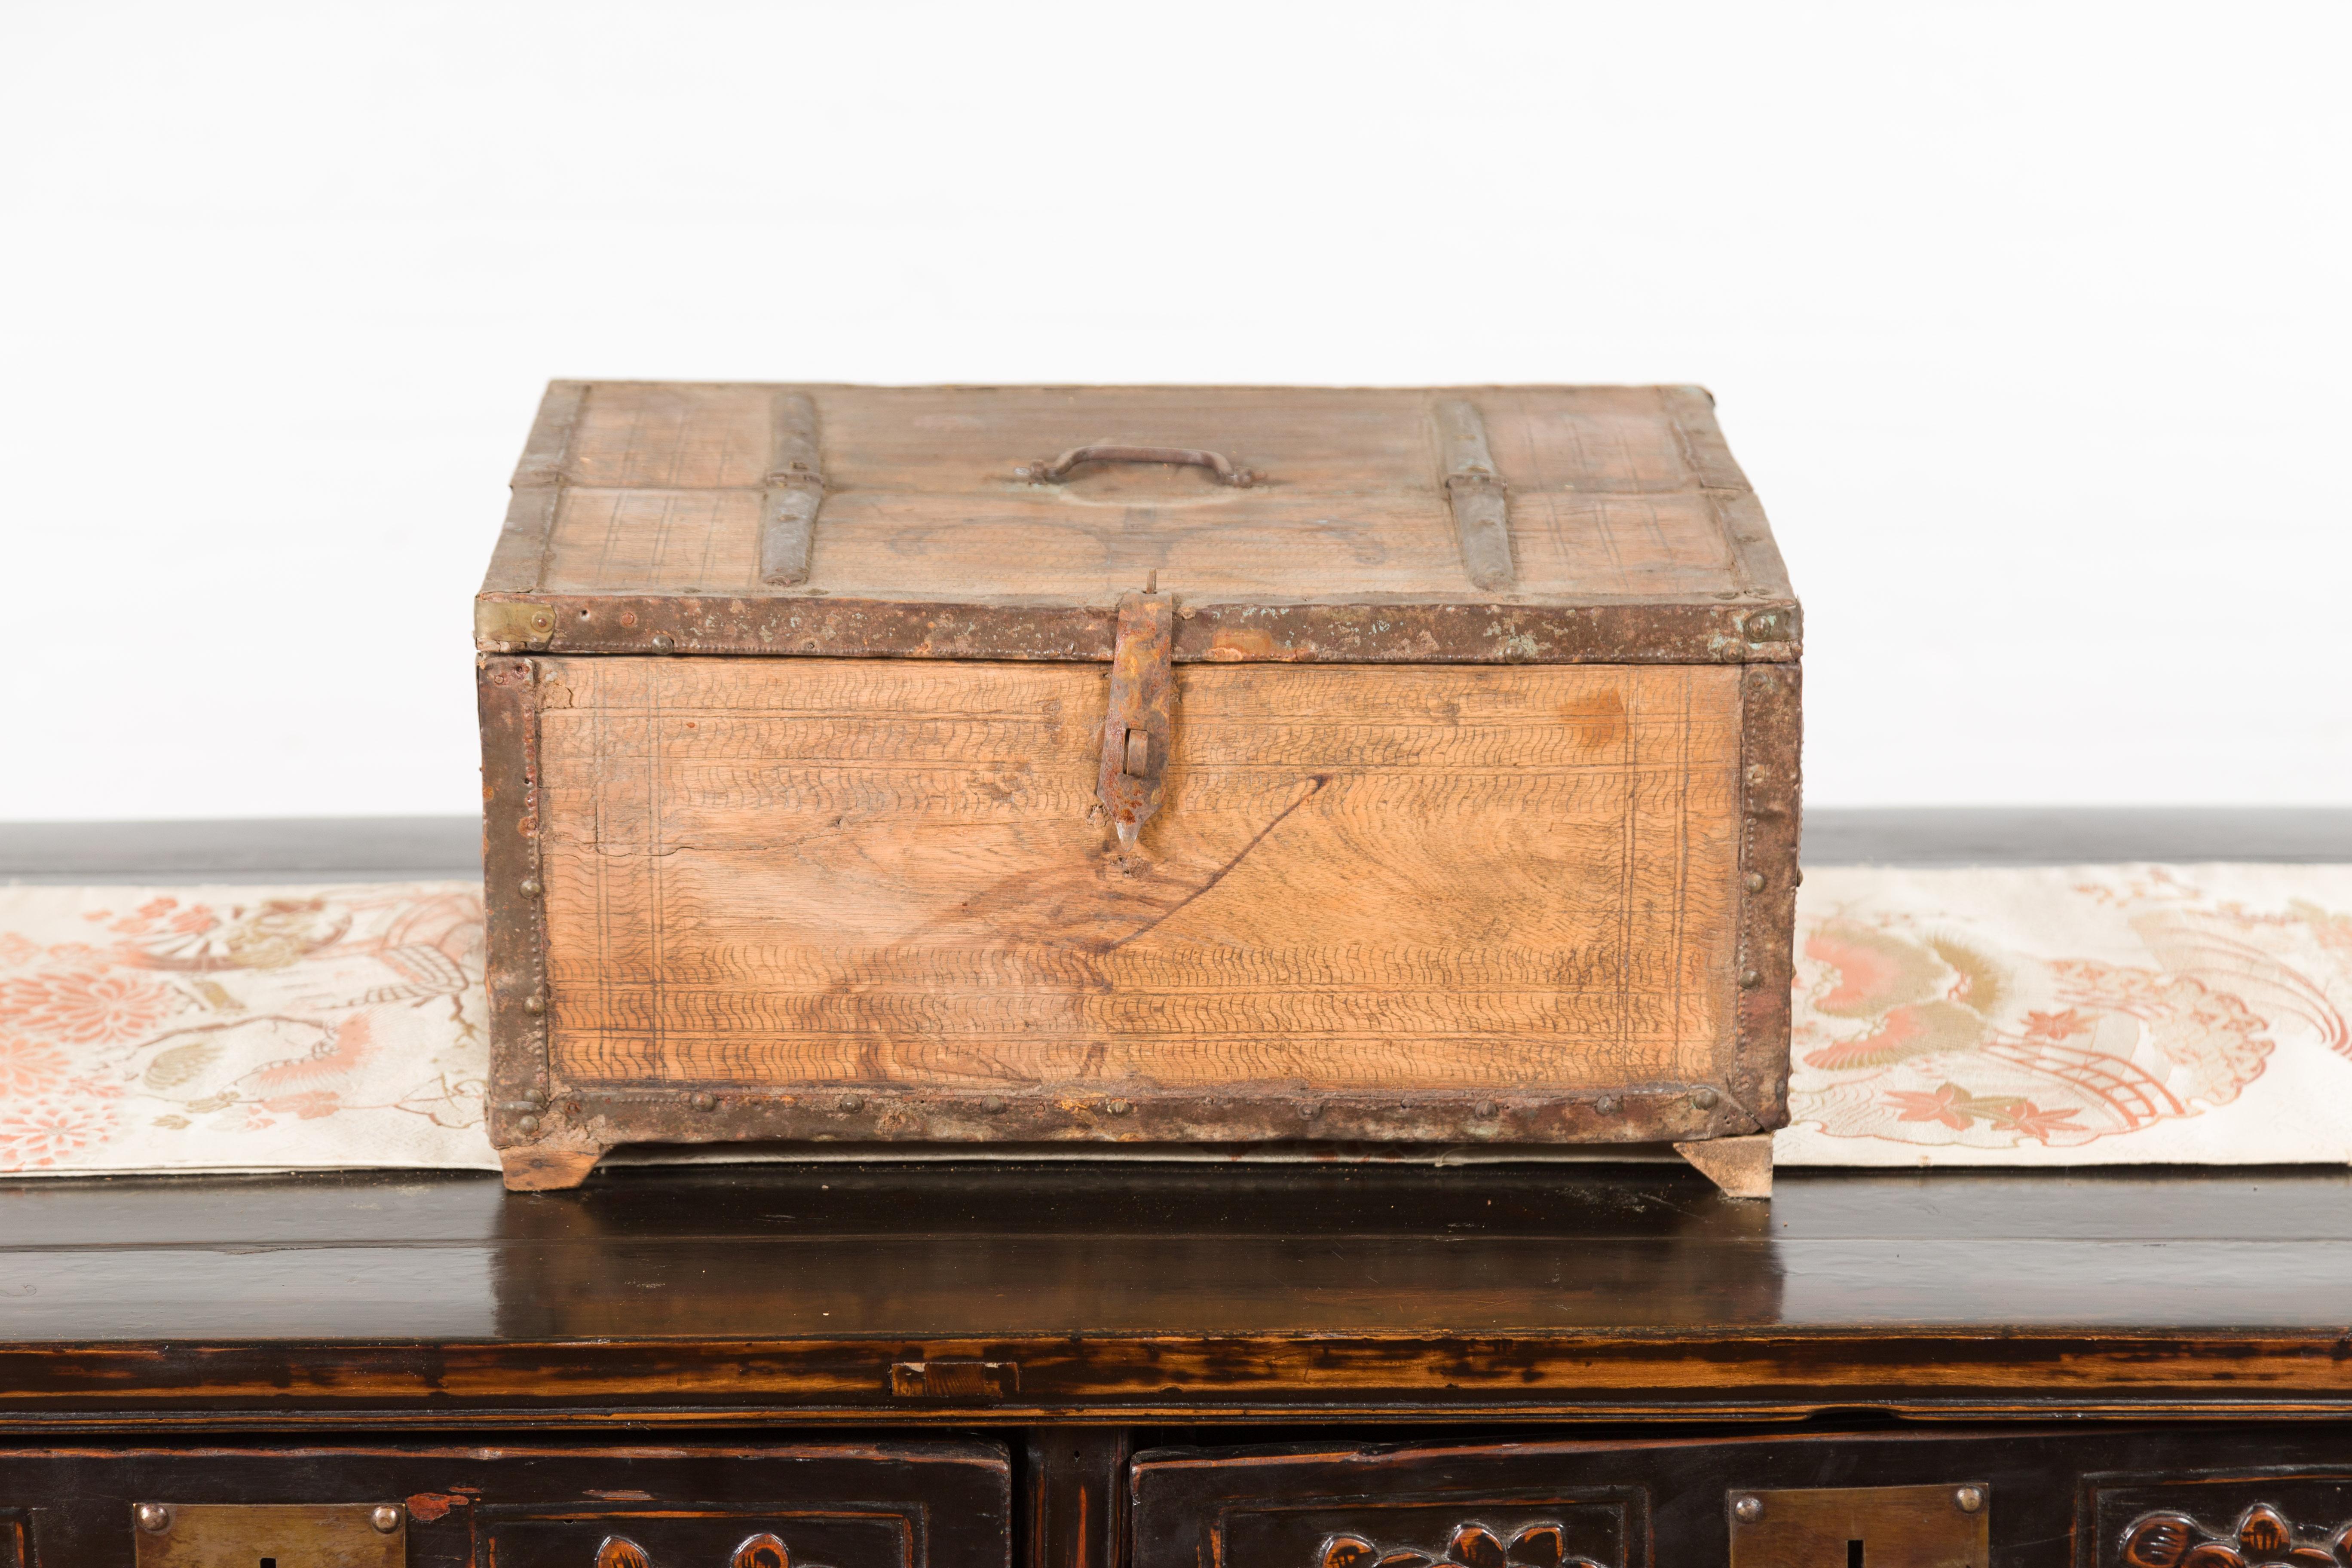 Rustic Indian 19th Century Wooden Box with Iron Details and Incised Motifs In Good Condition For Sale In Yonkers, NY